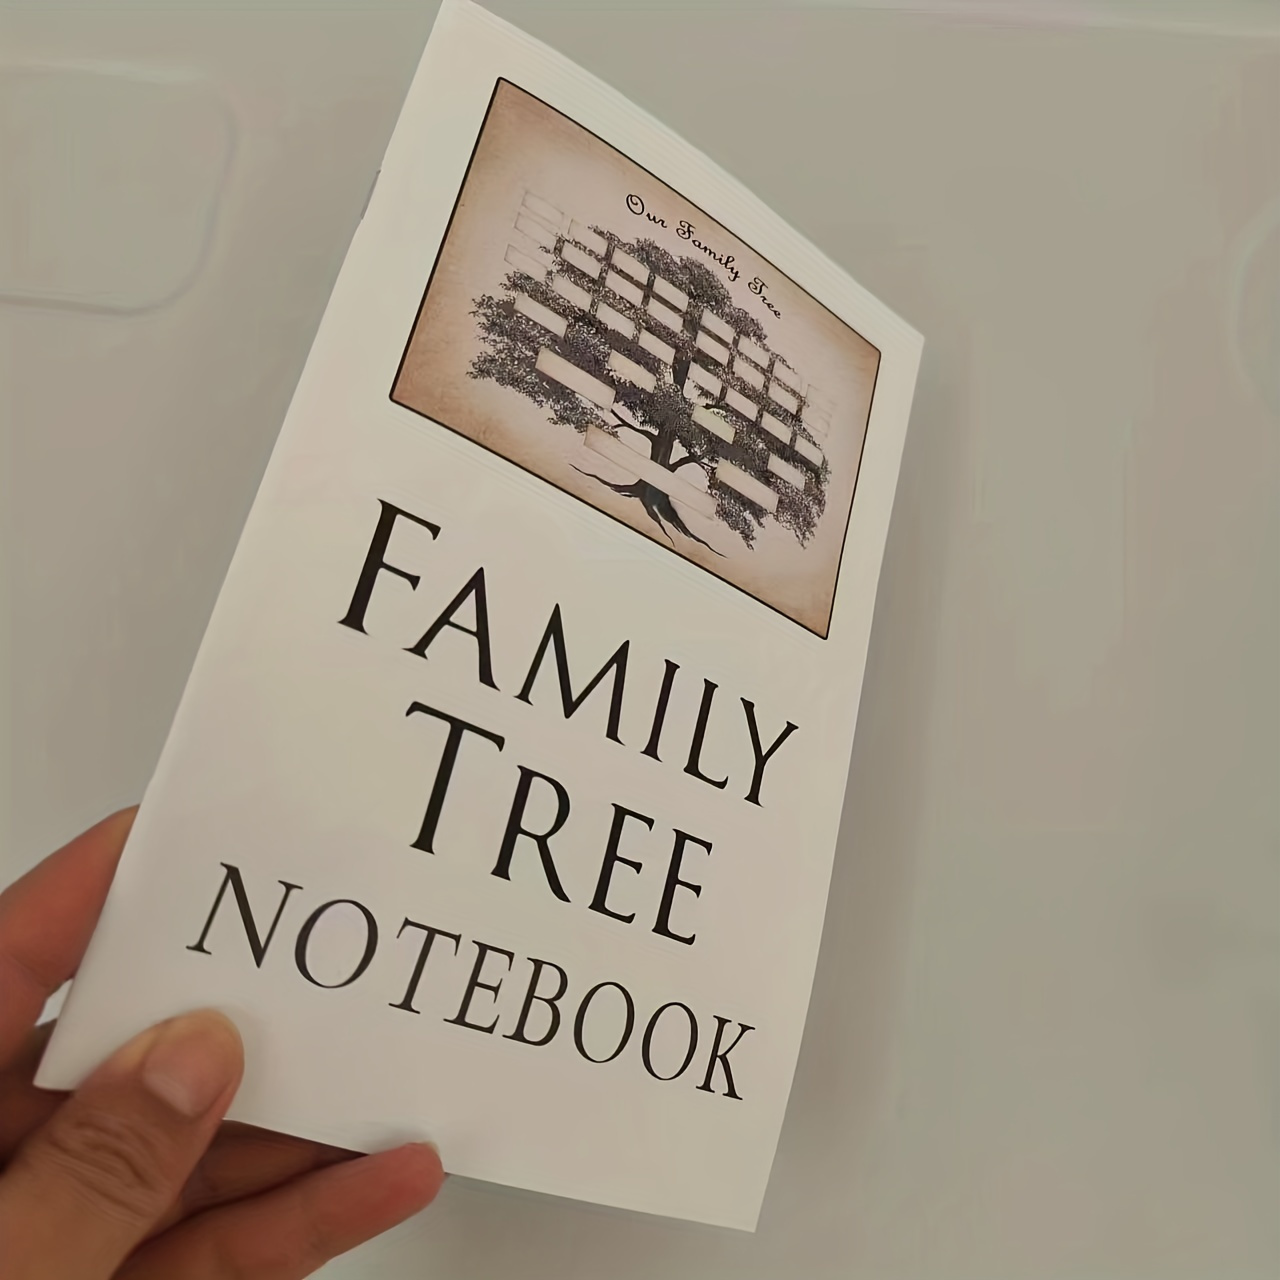 Family Tree Record Book: Genealogy Organizer and Notebook With Family Tree  Chart